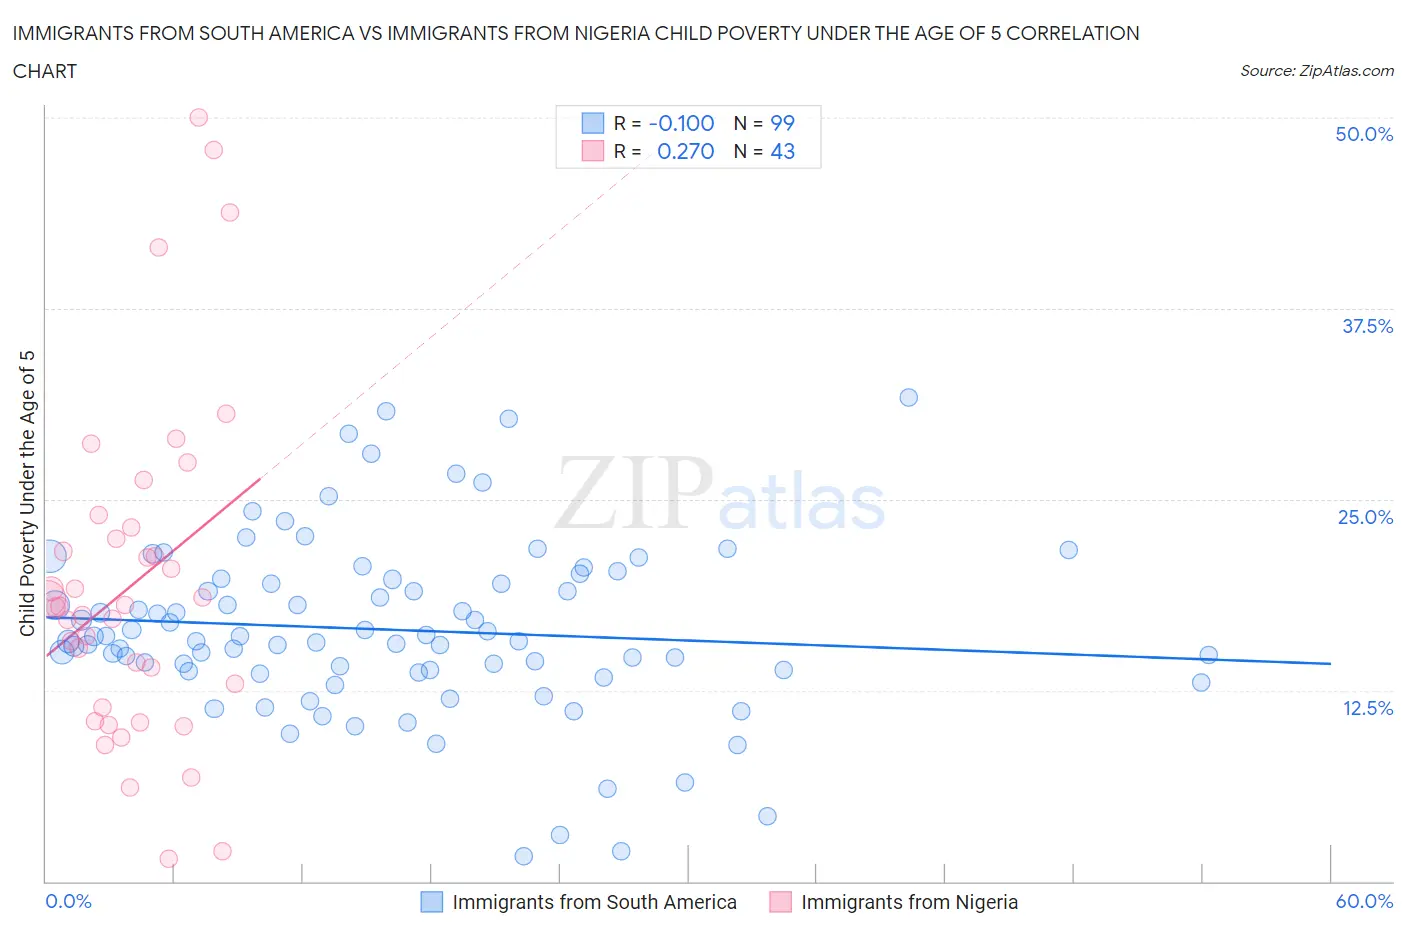 Immigrants from South America vs Immigrants from Nigeria Child Poverty Under the Age of 5